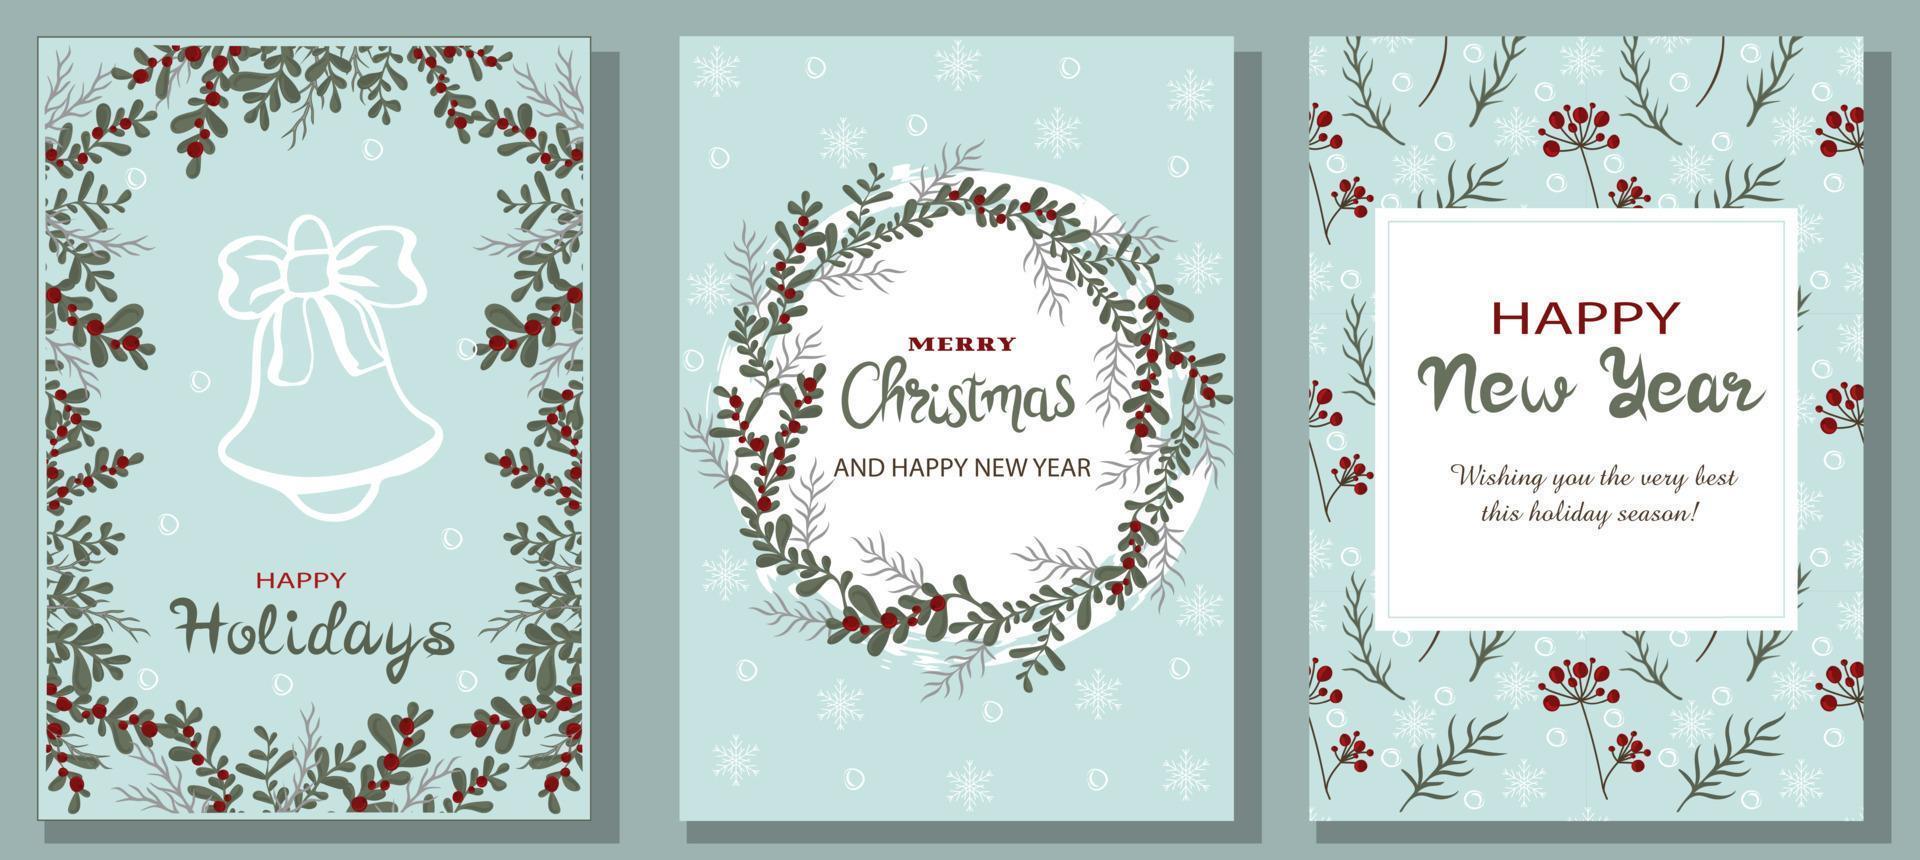 Delicate Merry Christmas and Happy new year greeting cards vector